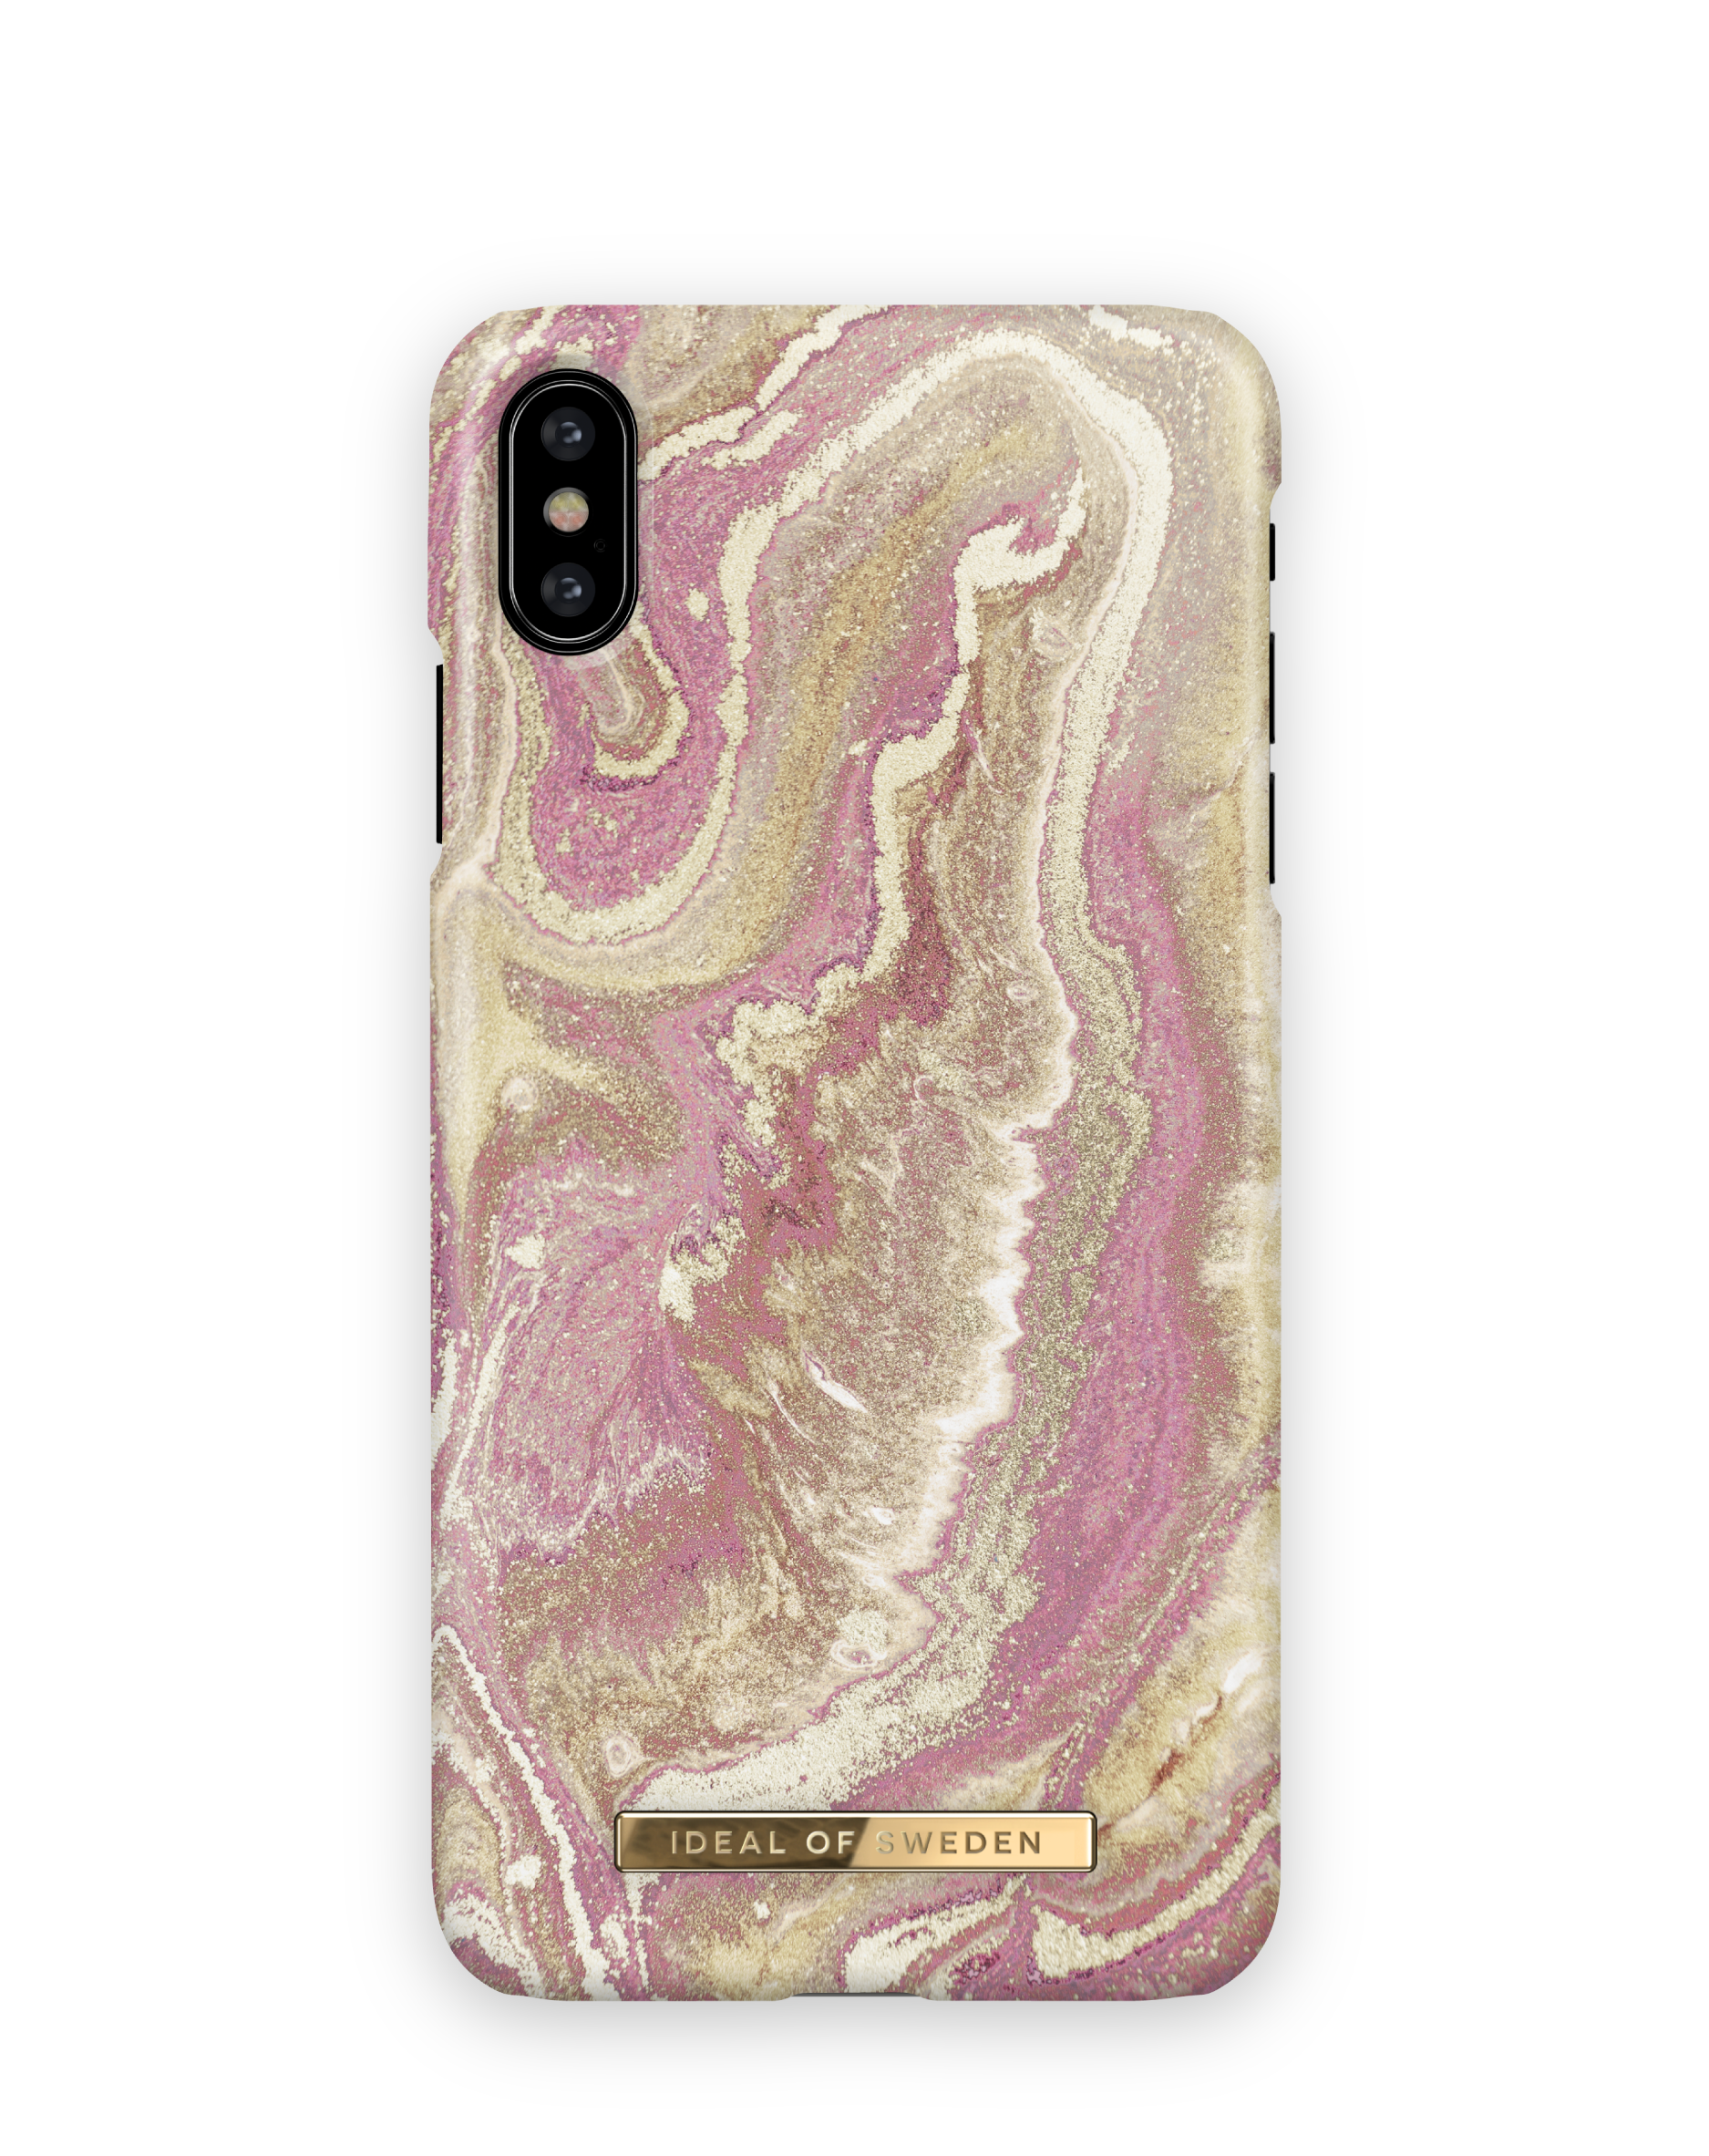 IDEAL IPhone OF SWEDEN Marble Backcover, IDFCSS19-IXS-120, X/XS, Golden Apple, Blush